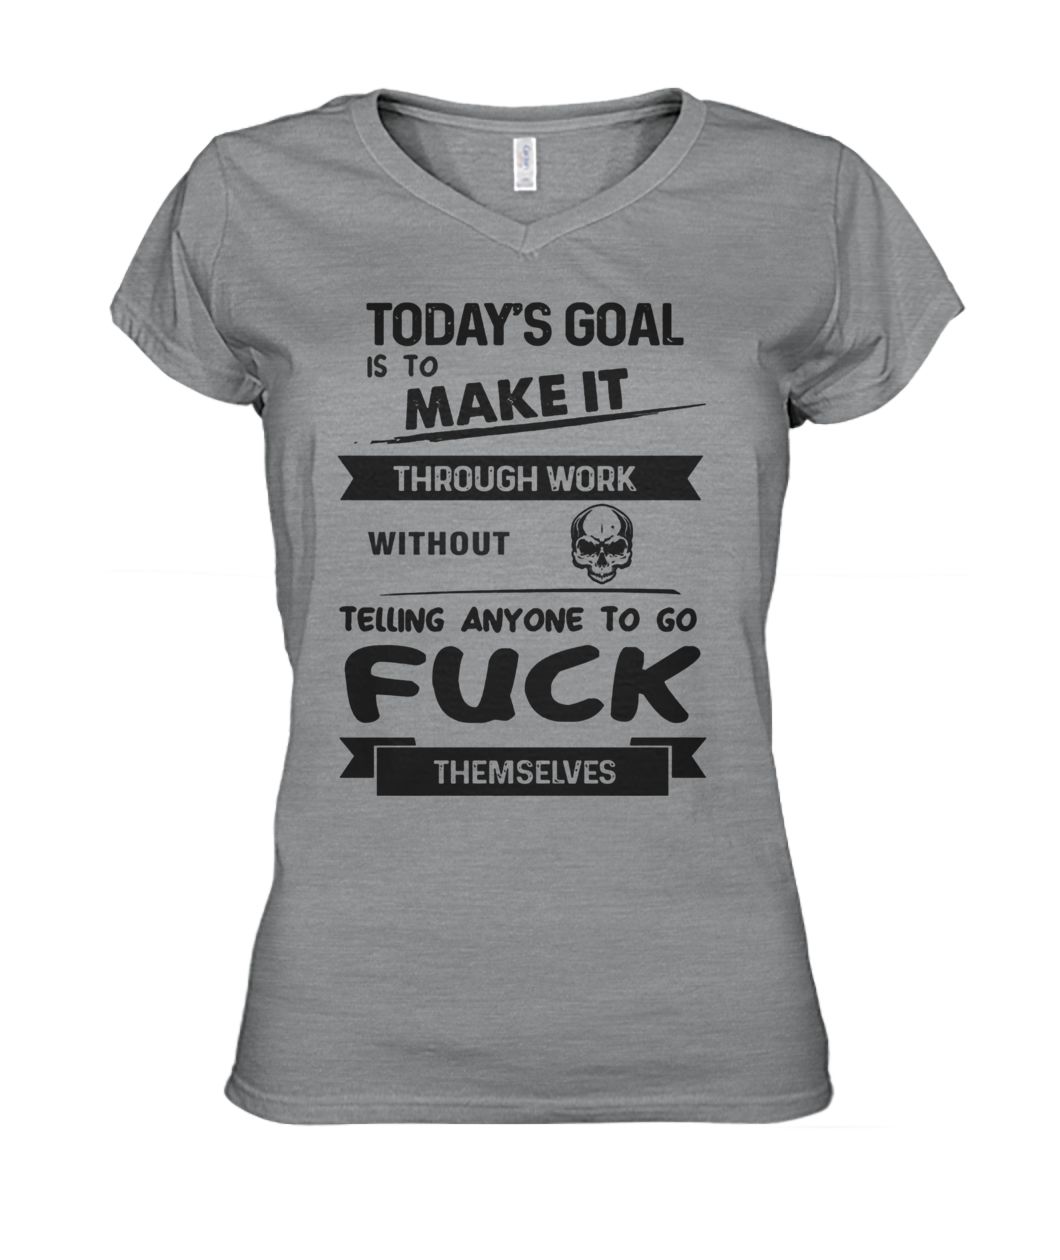 Today's goal is to make it through work without telling anyone to go fuck themselves women's v-neck